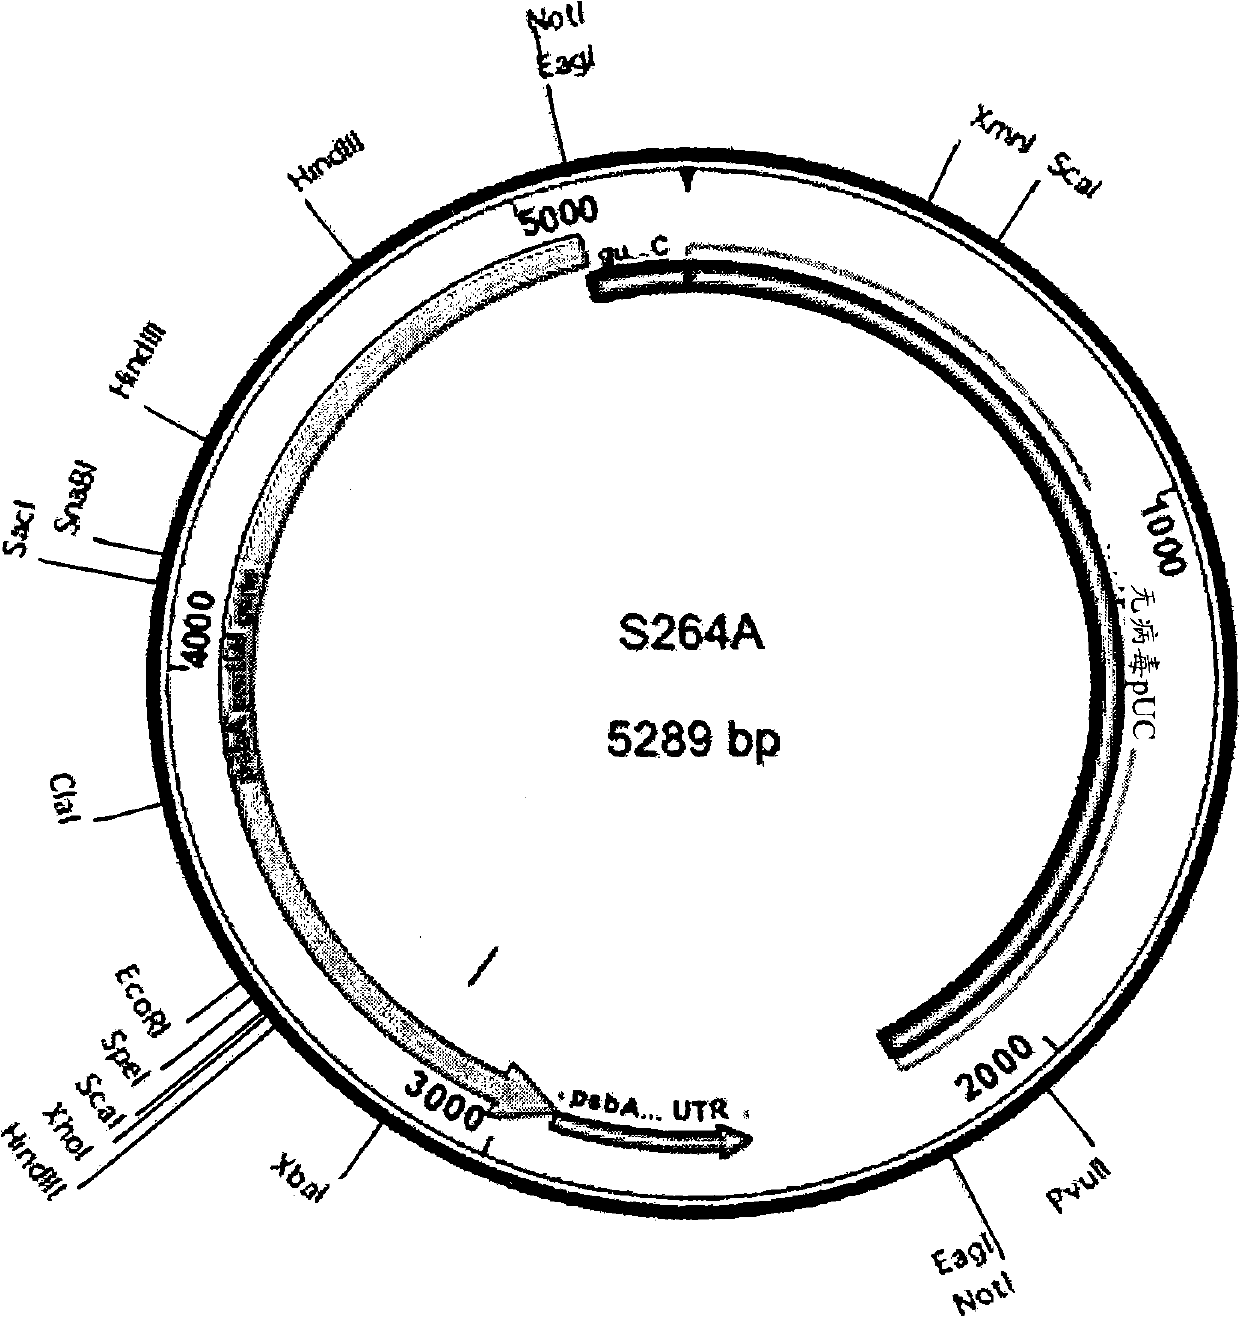 A system for transformation of the chloroplast genome of scenedesmus sp. and dunaliella sp.